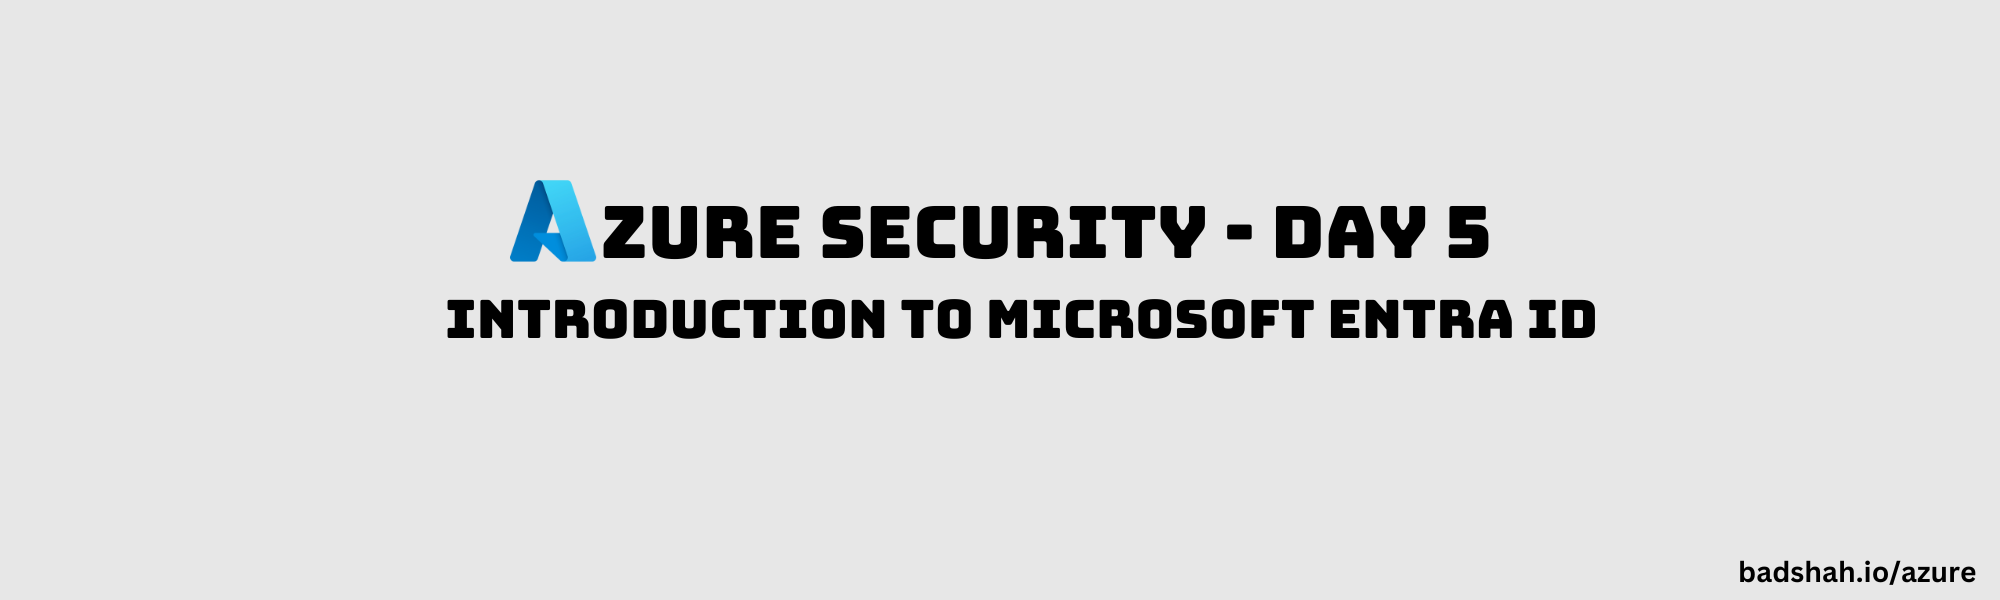 /azure/introduction-to-microsoft-entra-id/cover-image.png